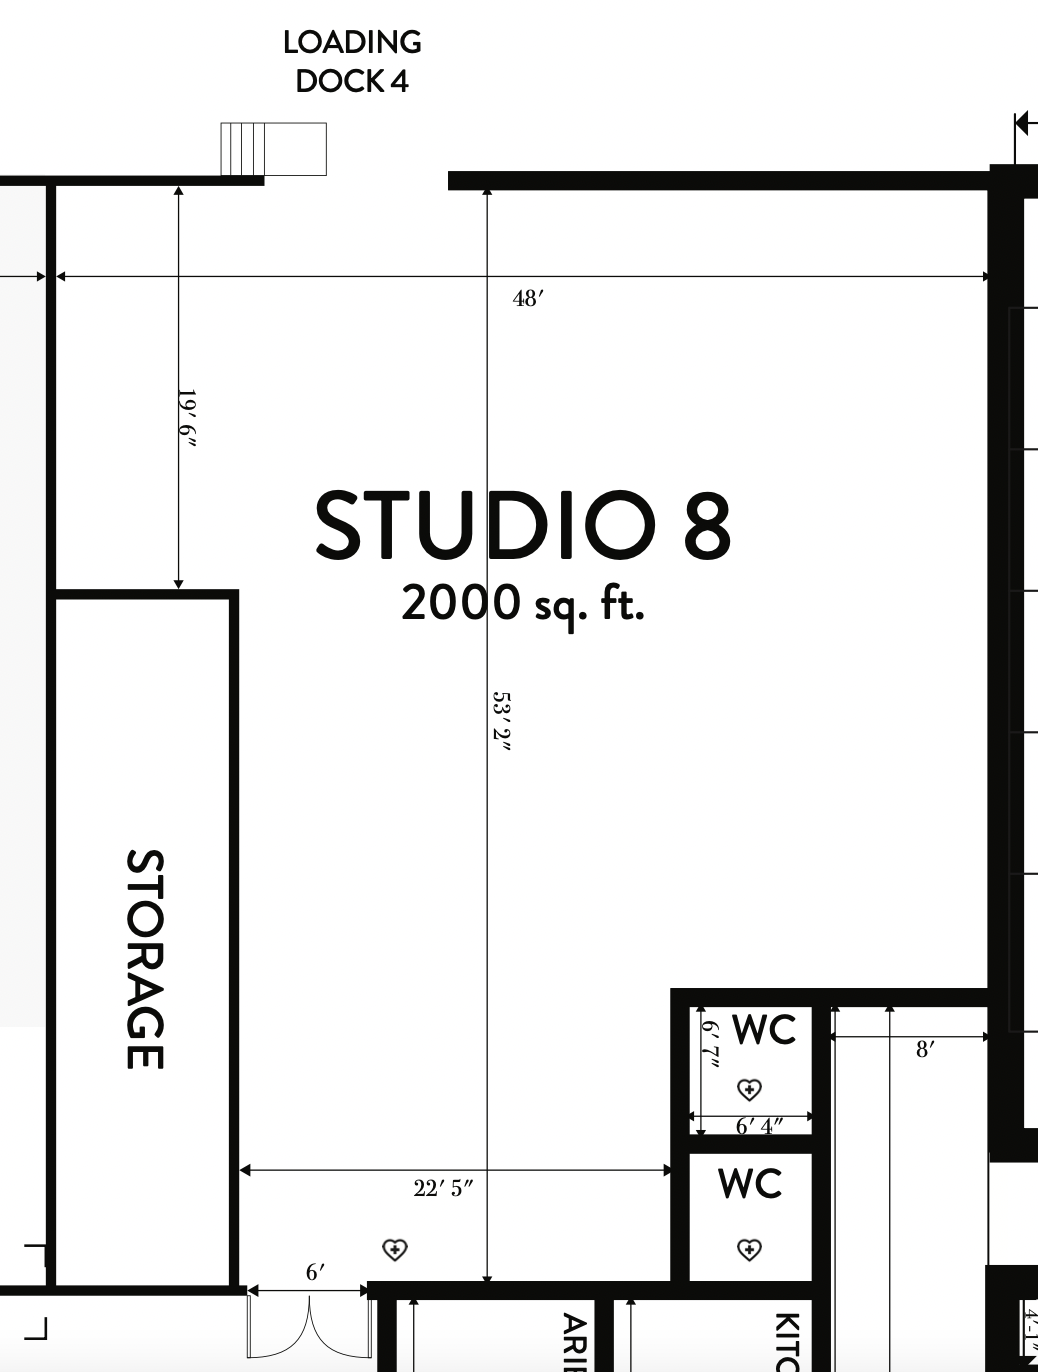 This black and white floor plan of this 2000-square foot space includes a loading dock, two bathrooms, and a storage area that make this the ideal creative studio space for rent.